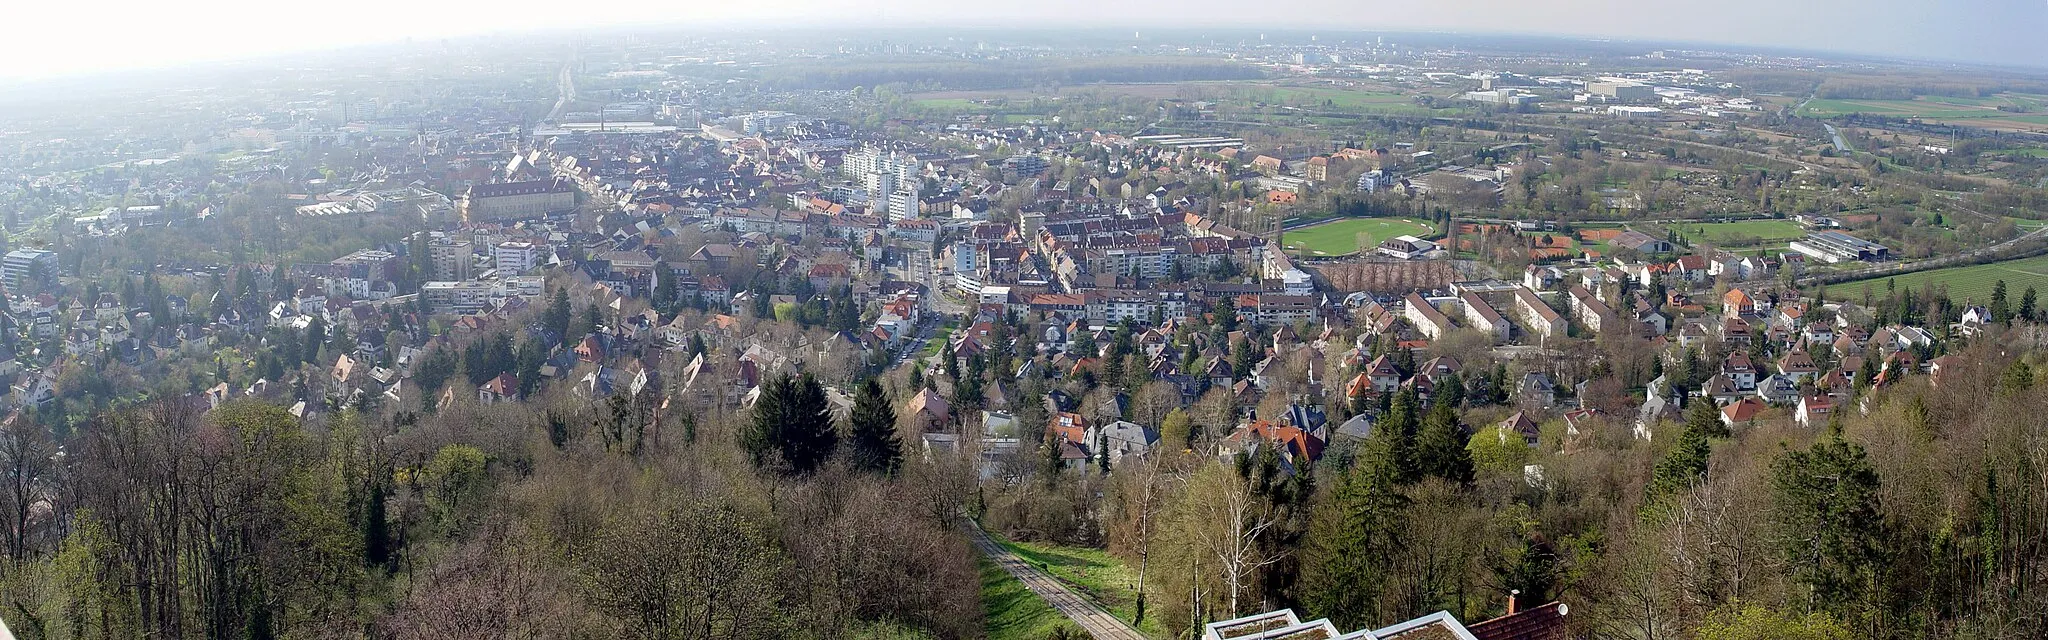 Photo showing: Panoramic view of the city of Karlsruhe, Germany, as seen from the top of Mt. Turmberg in the district of Durlach, which can be seen in the foreground.